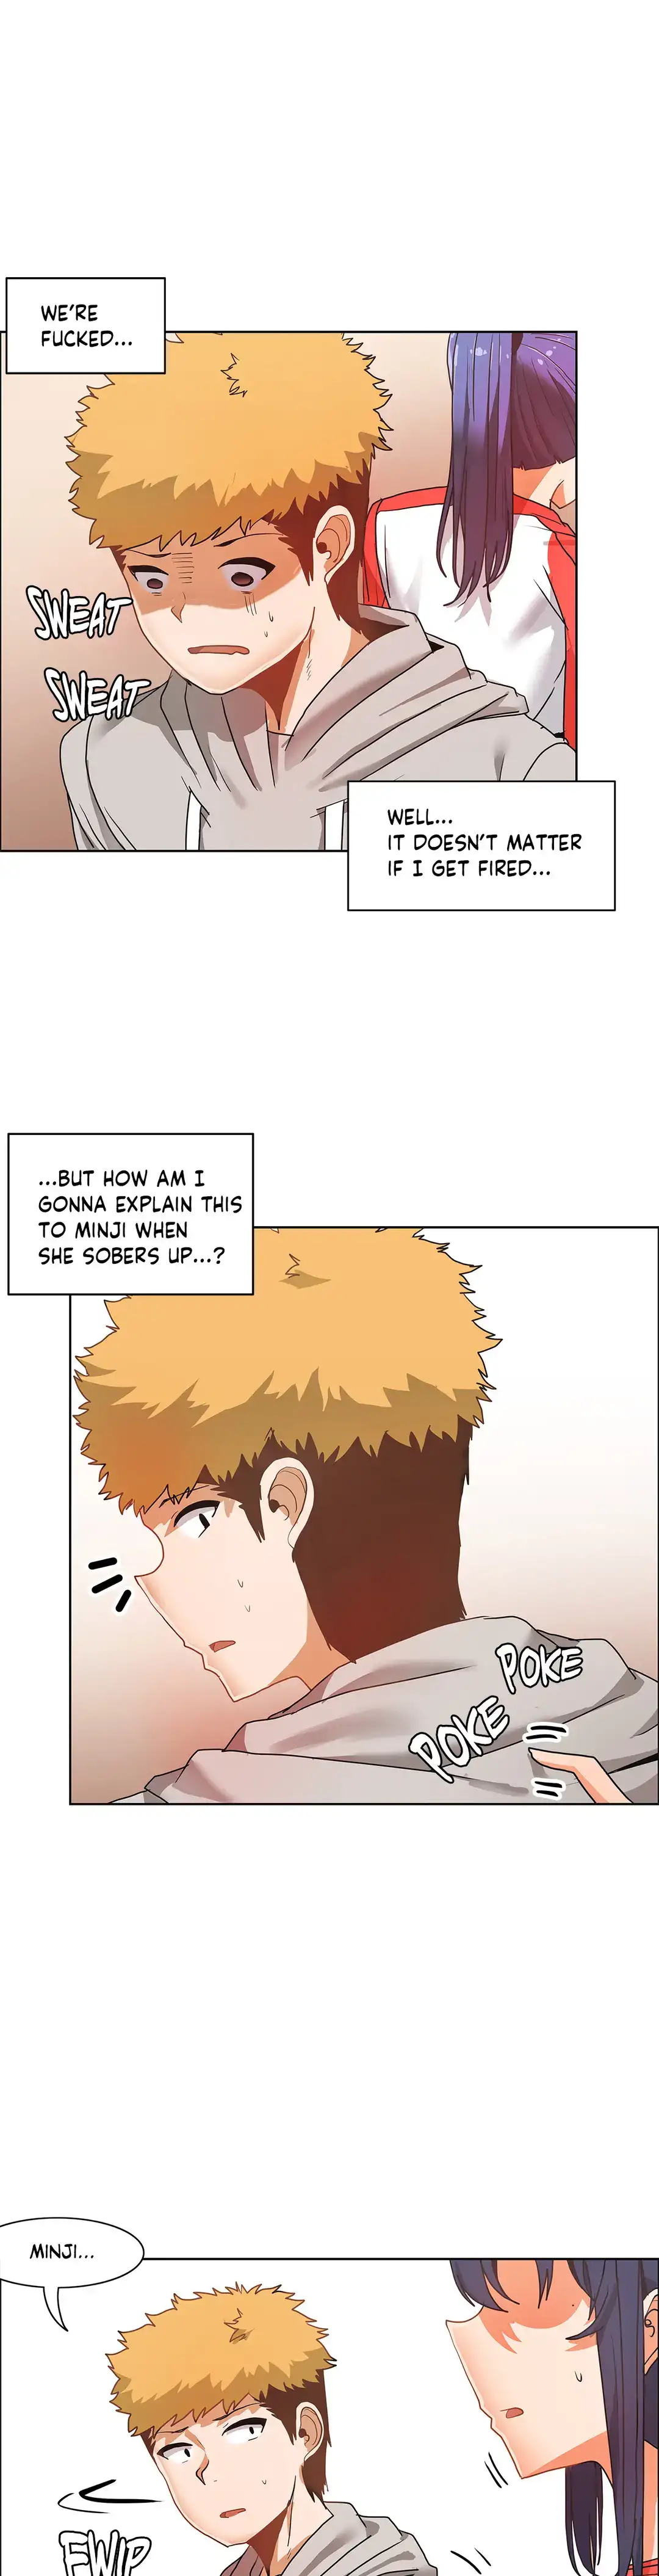 The Girl That Wet the Wall - Chapter 34 Page 4